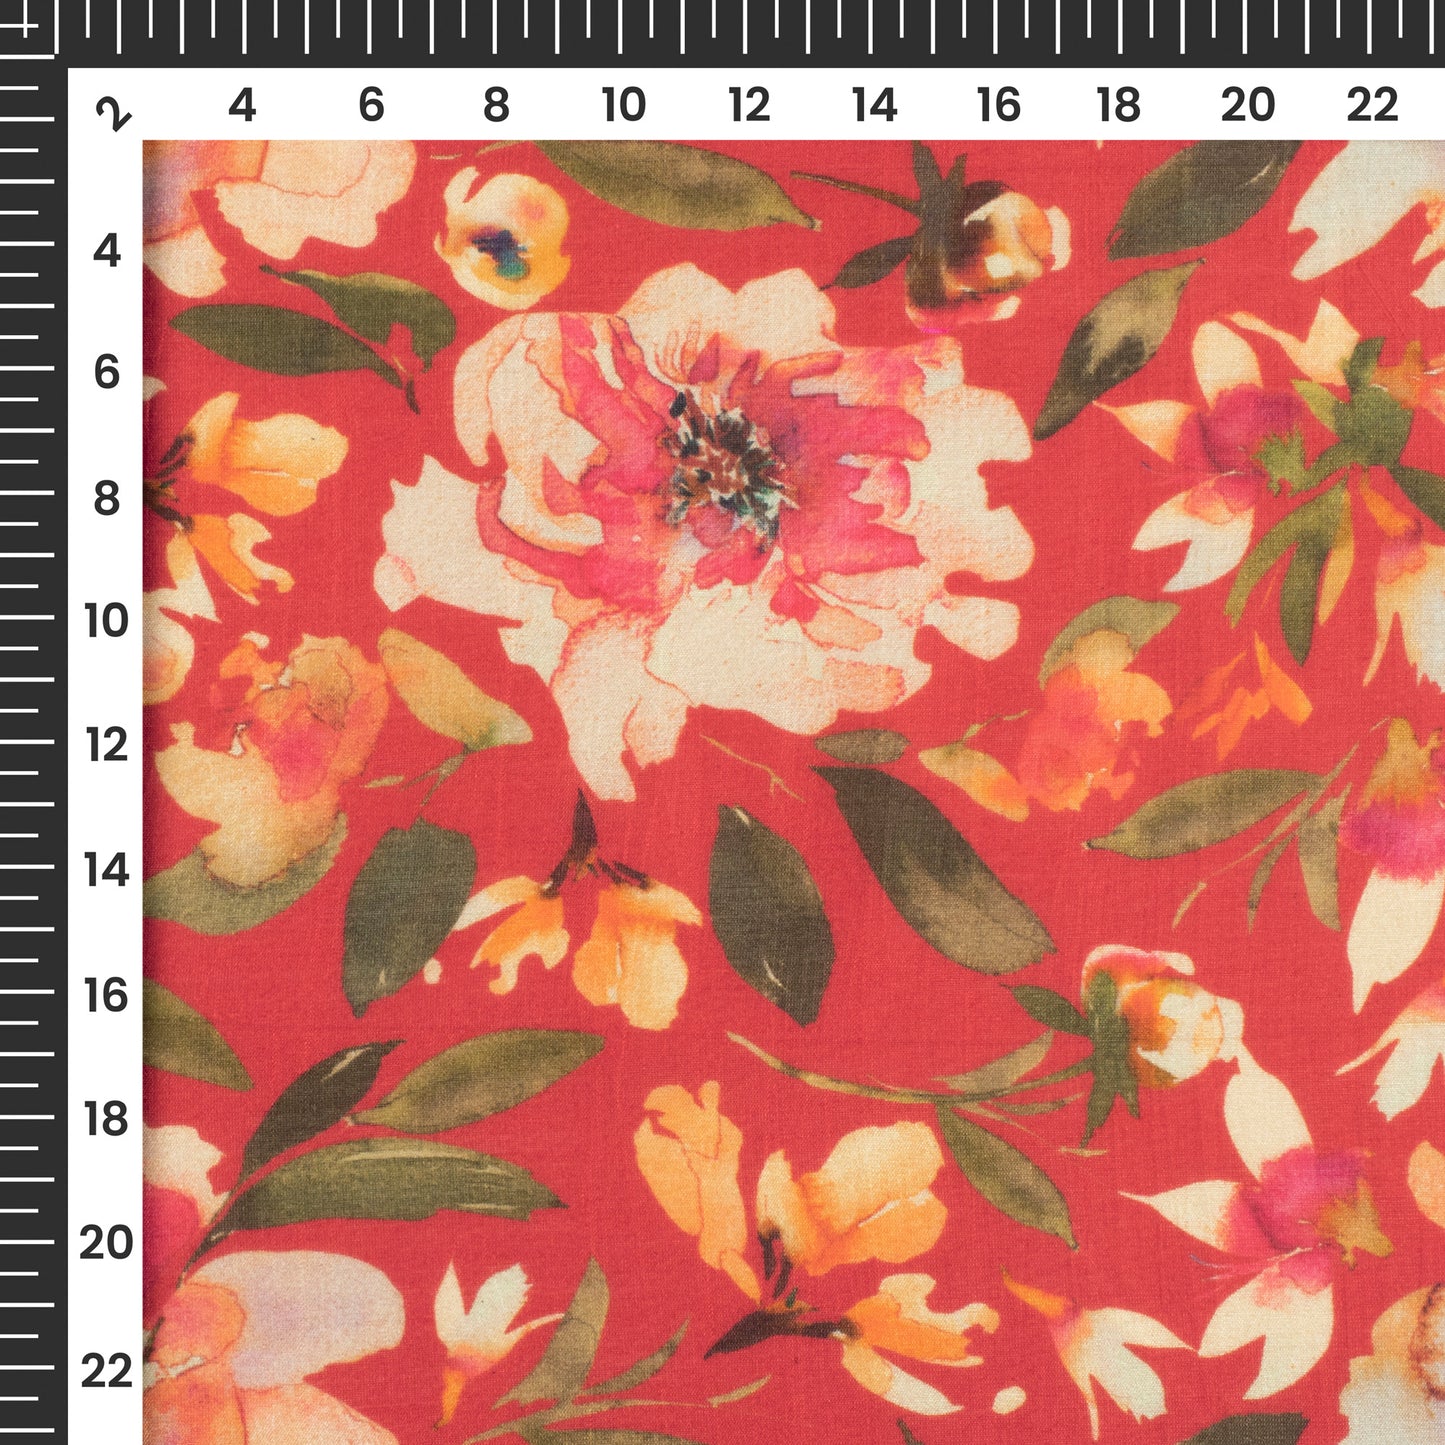 Carmine Red Floral Printed Sustainable Orange Fabric